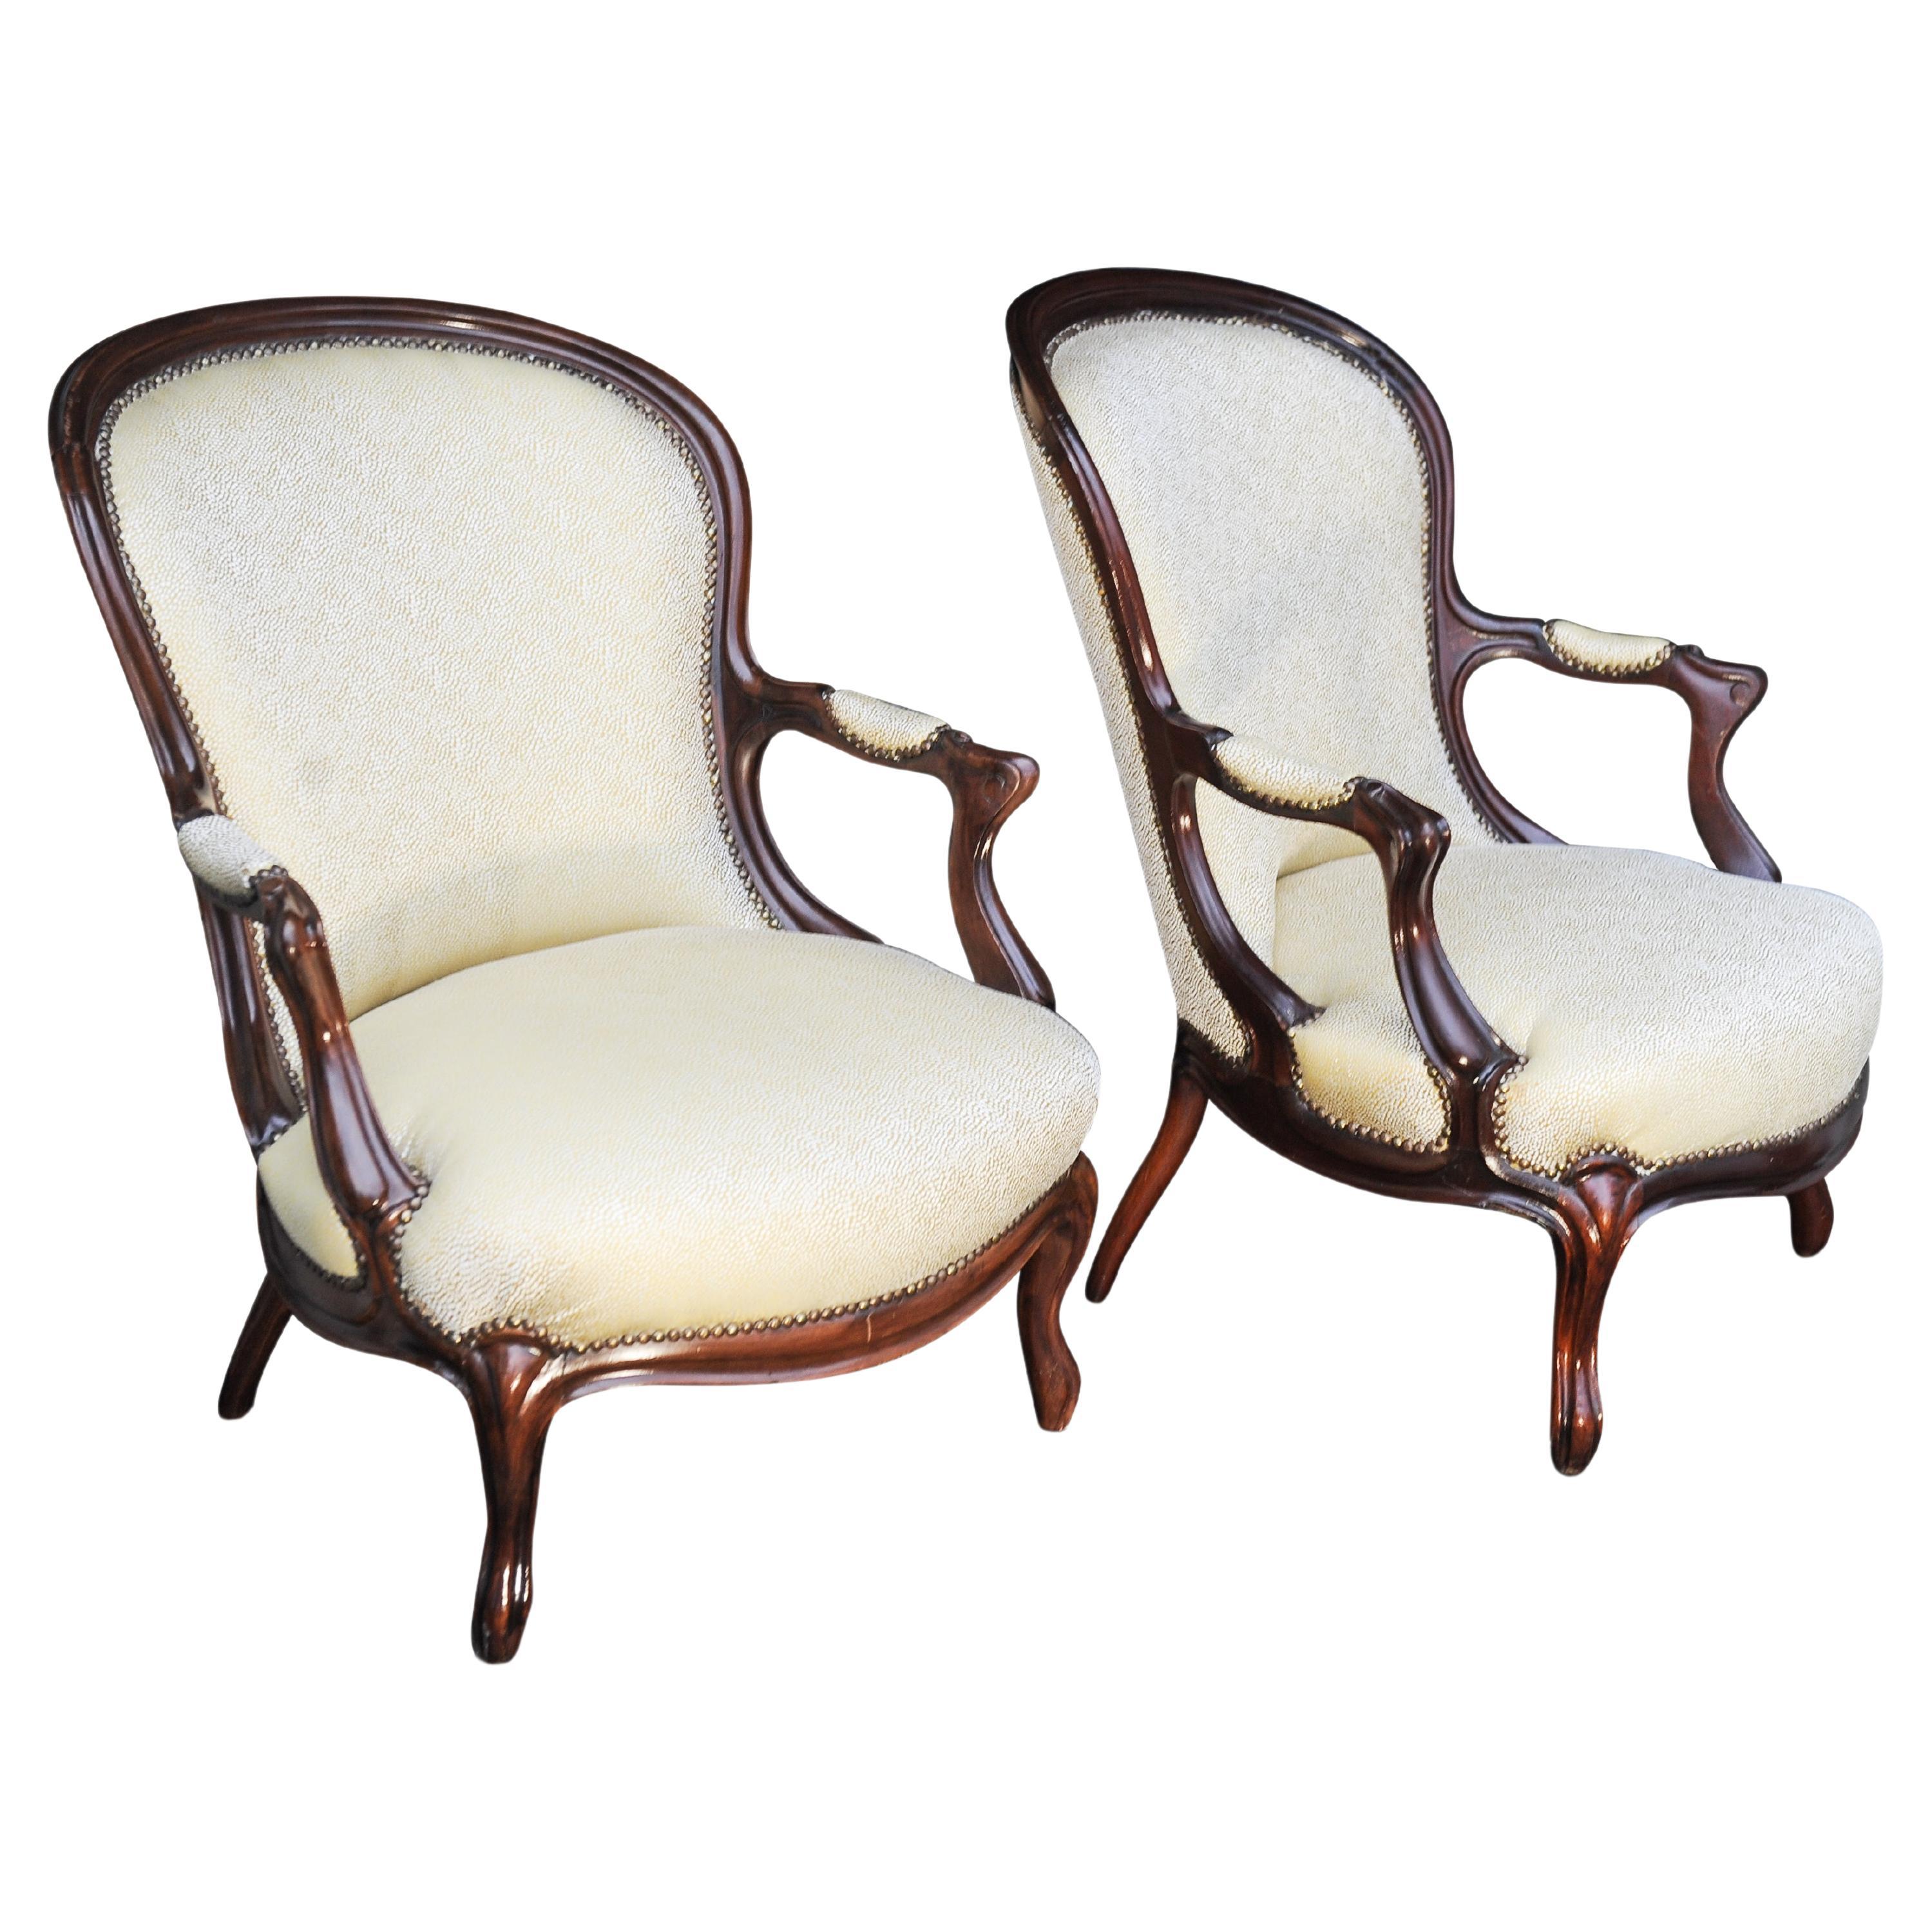 Classic Pair of Victorian Shagreen Upholstered Mahogany Framed Open Armchairs For Sale